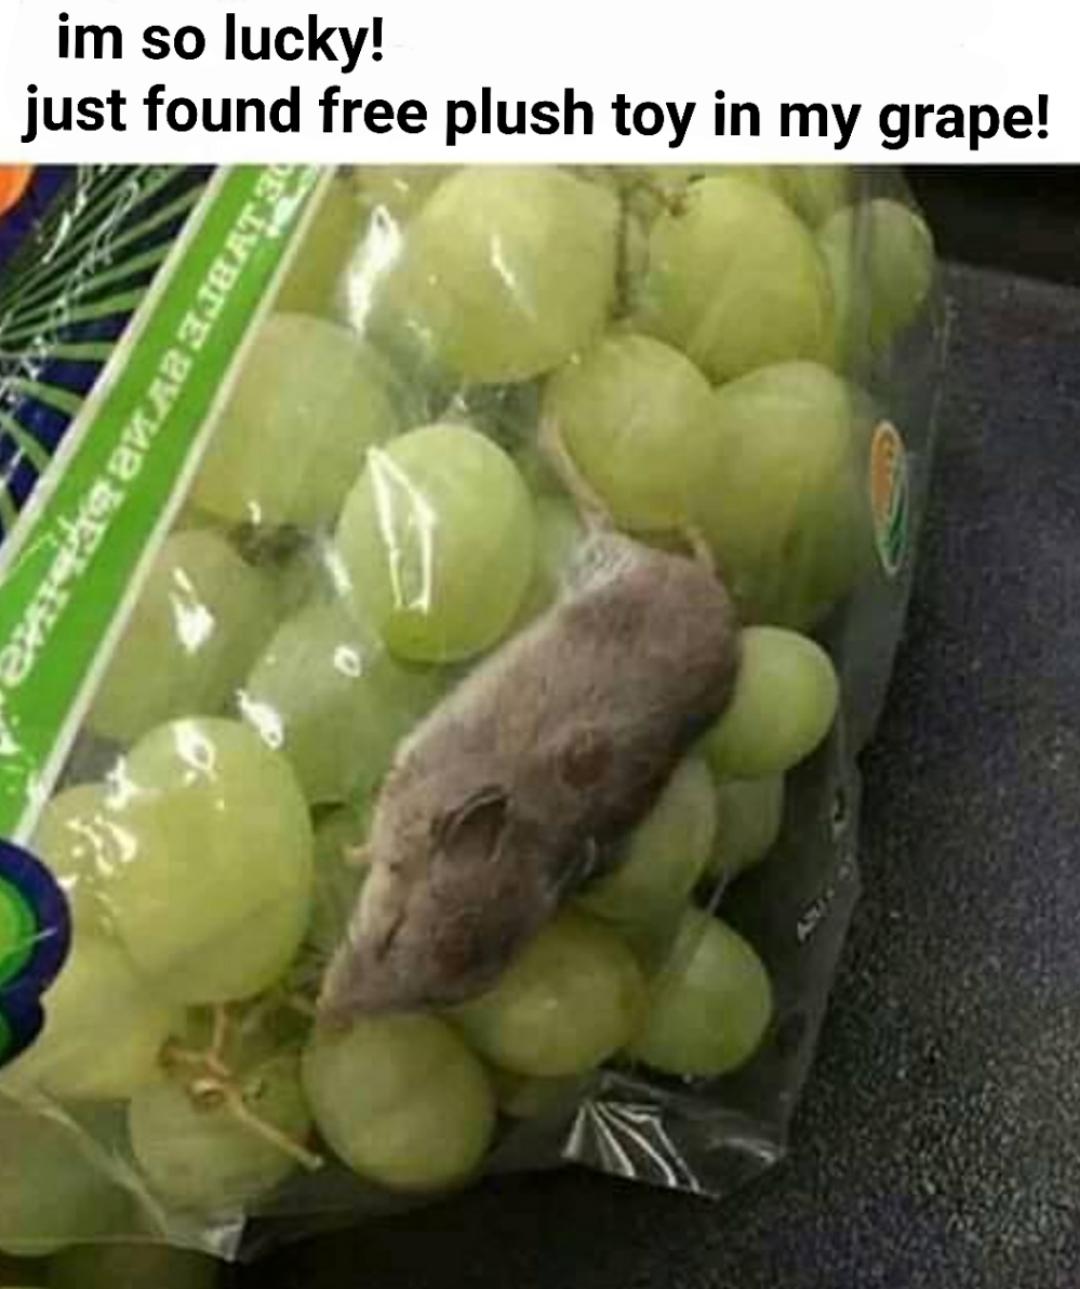 funny memes - im so lucky! just found free plush toy in my grape!